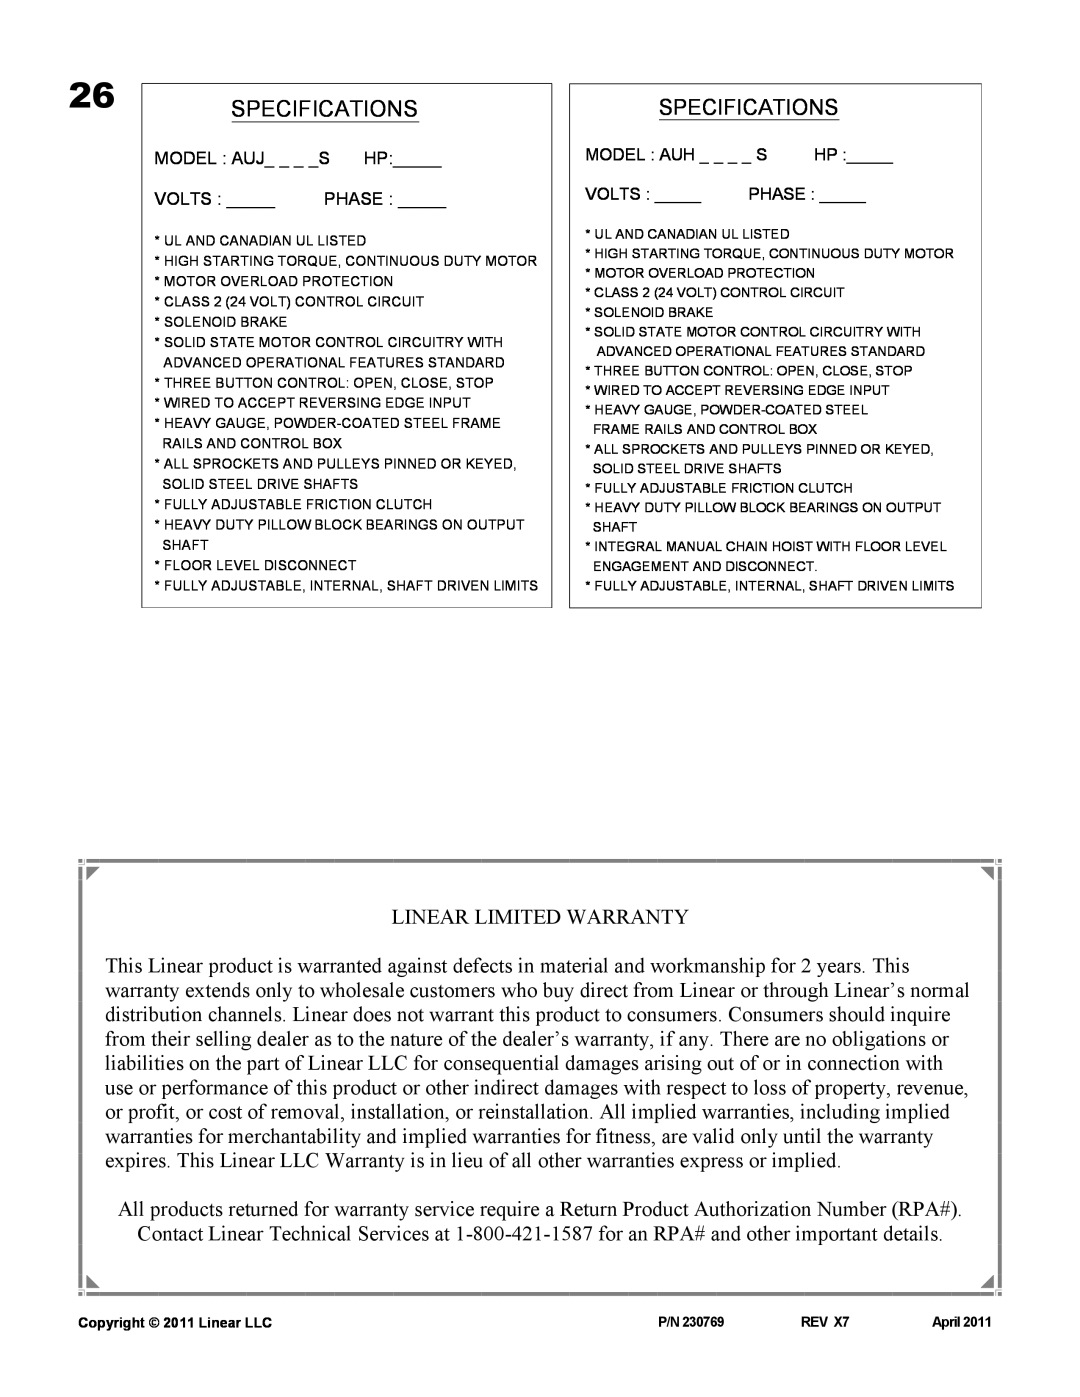 Linear AUJ-S, AUH-S owner manual Specifications 